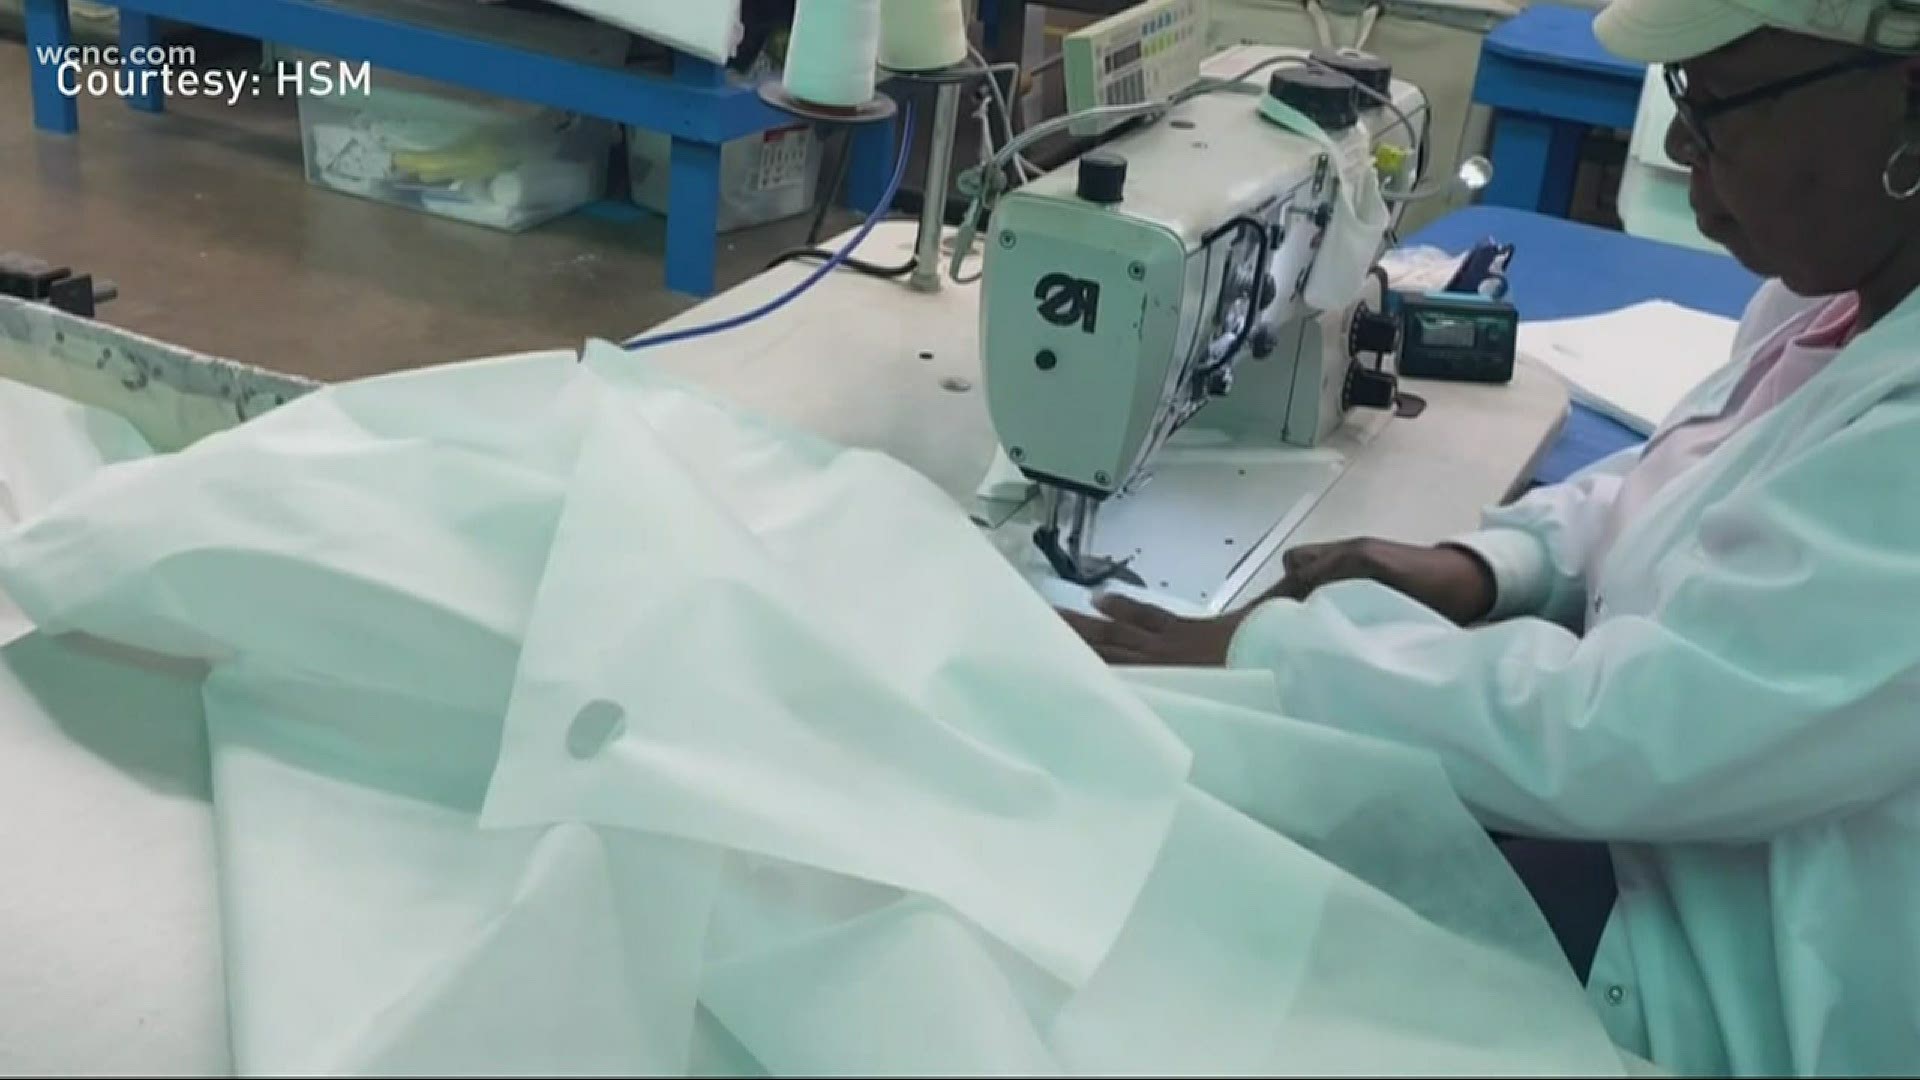 HSM Solutions is shipping out masks, gowns and medical mattresses to alleviate a nationwide shortage.